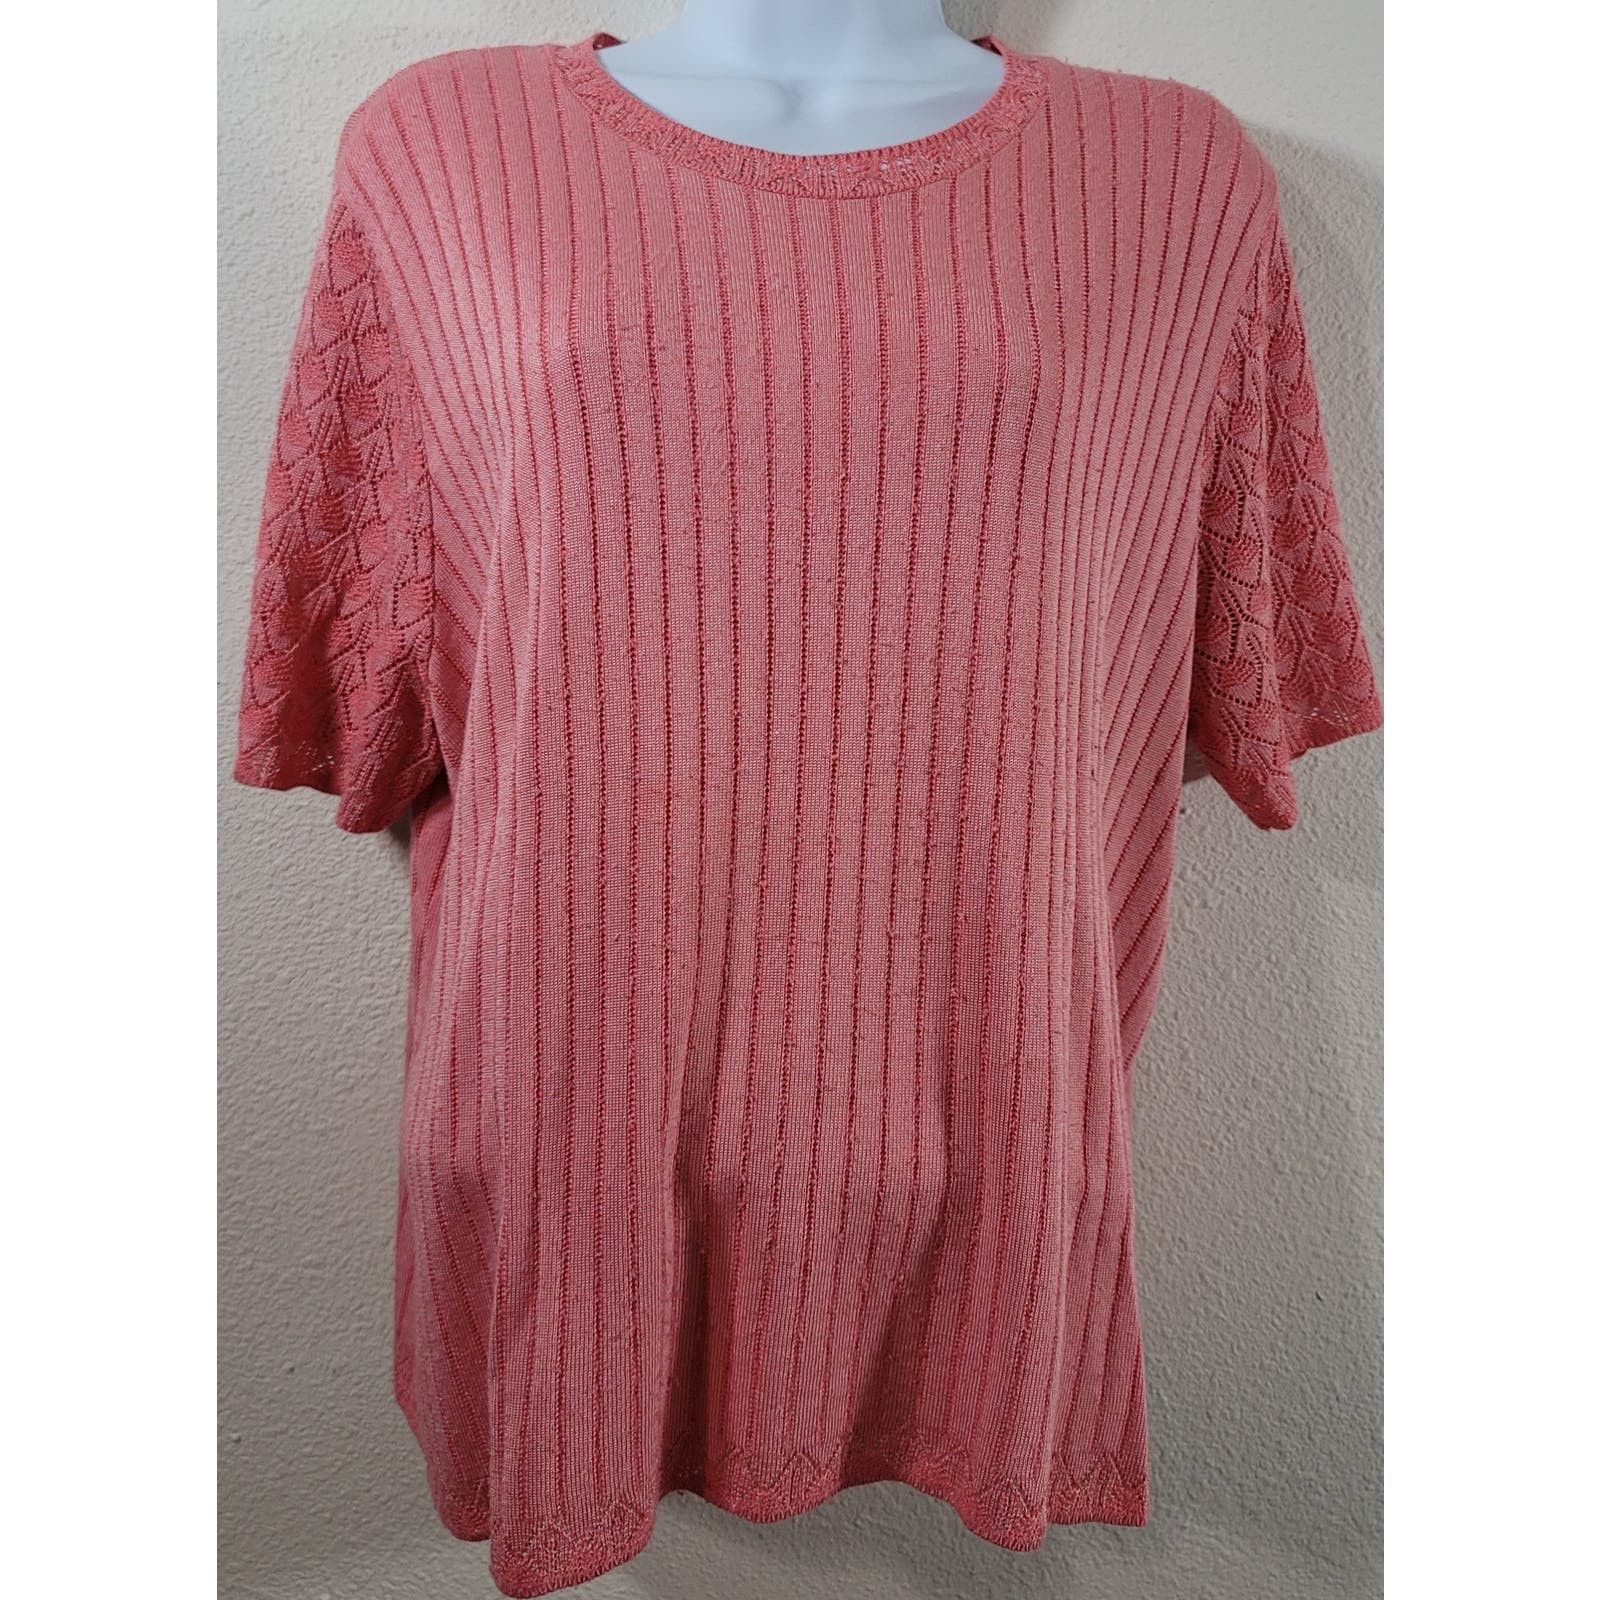 Other Alfred Dunner Coral Orange Pink Round Neck Top XL Stretch Size XL / US 12-14 / IT 48-50 - 1 Preview